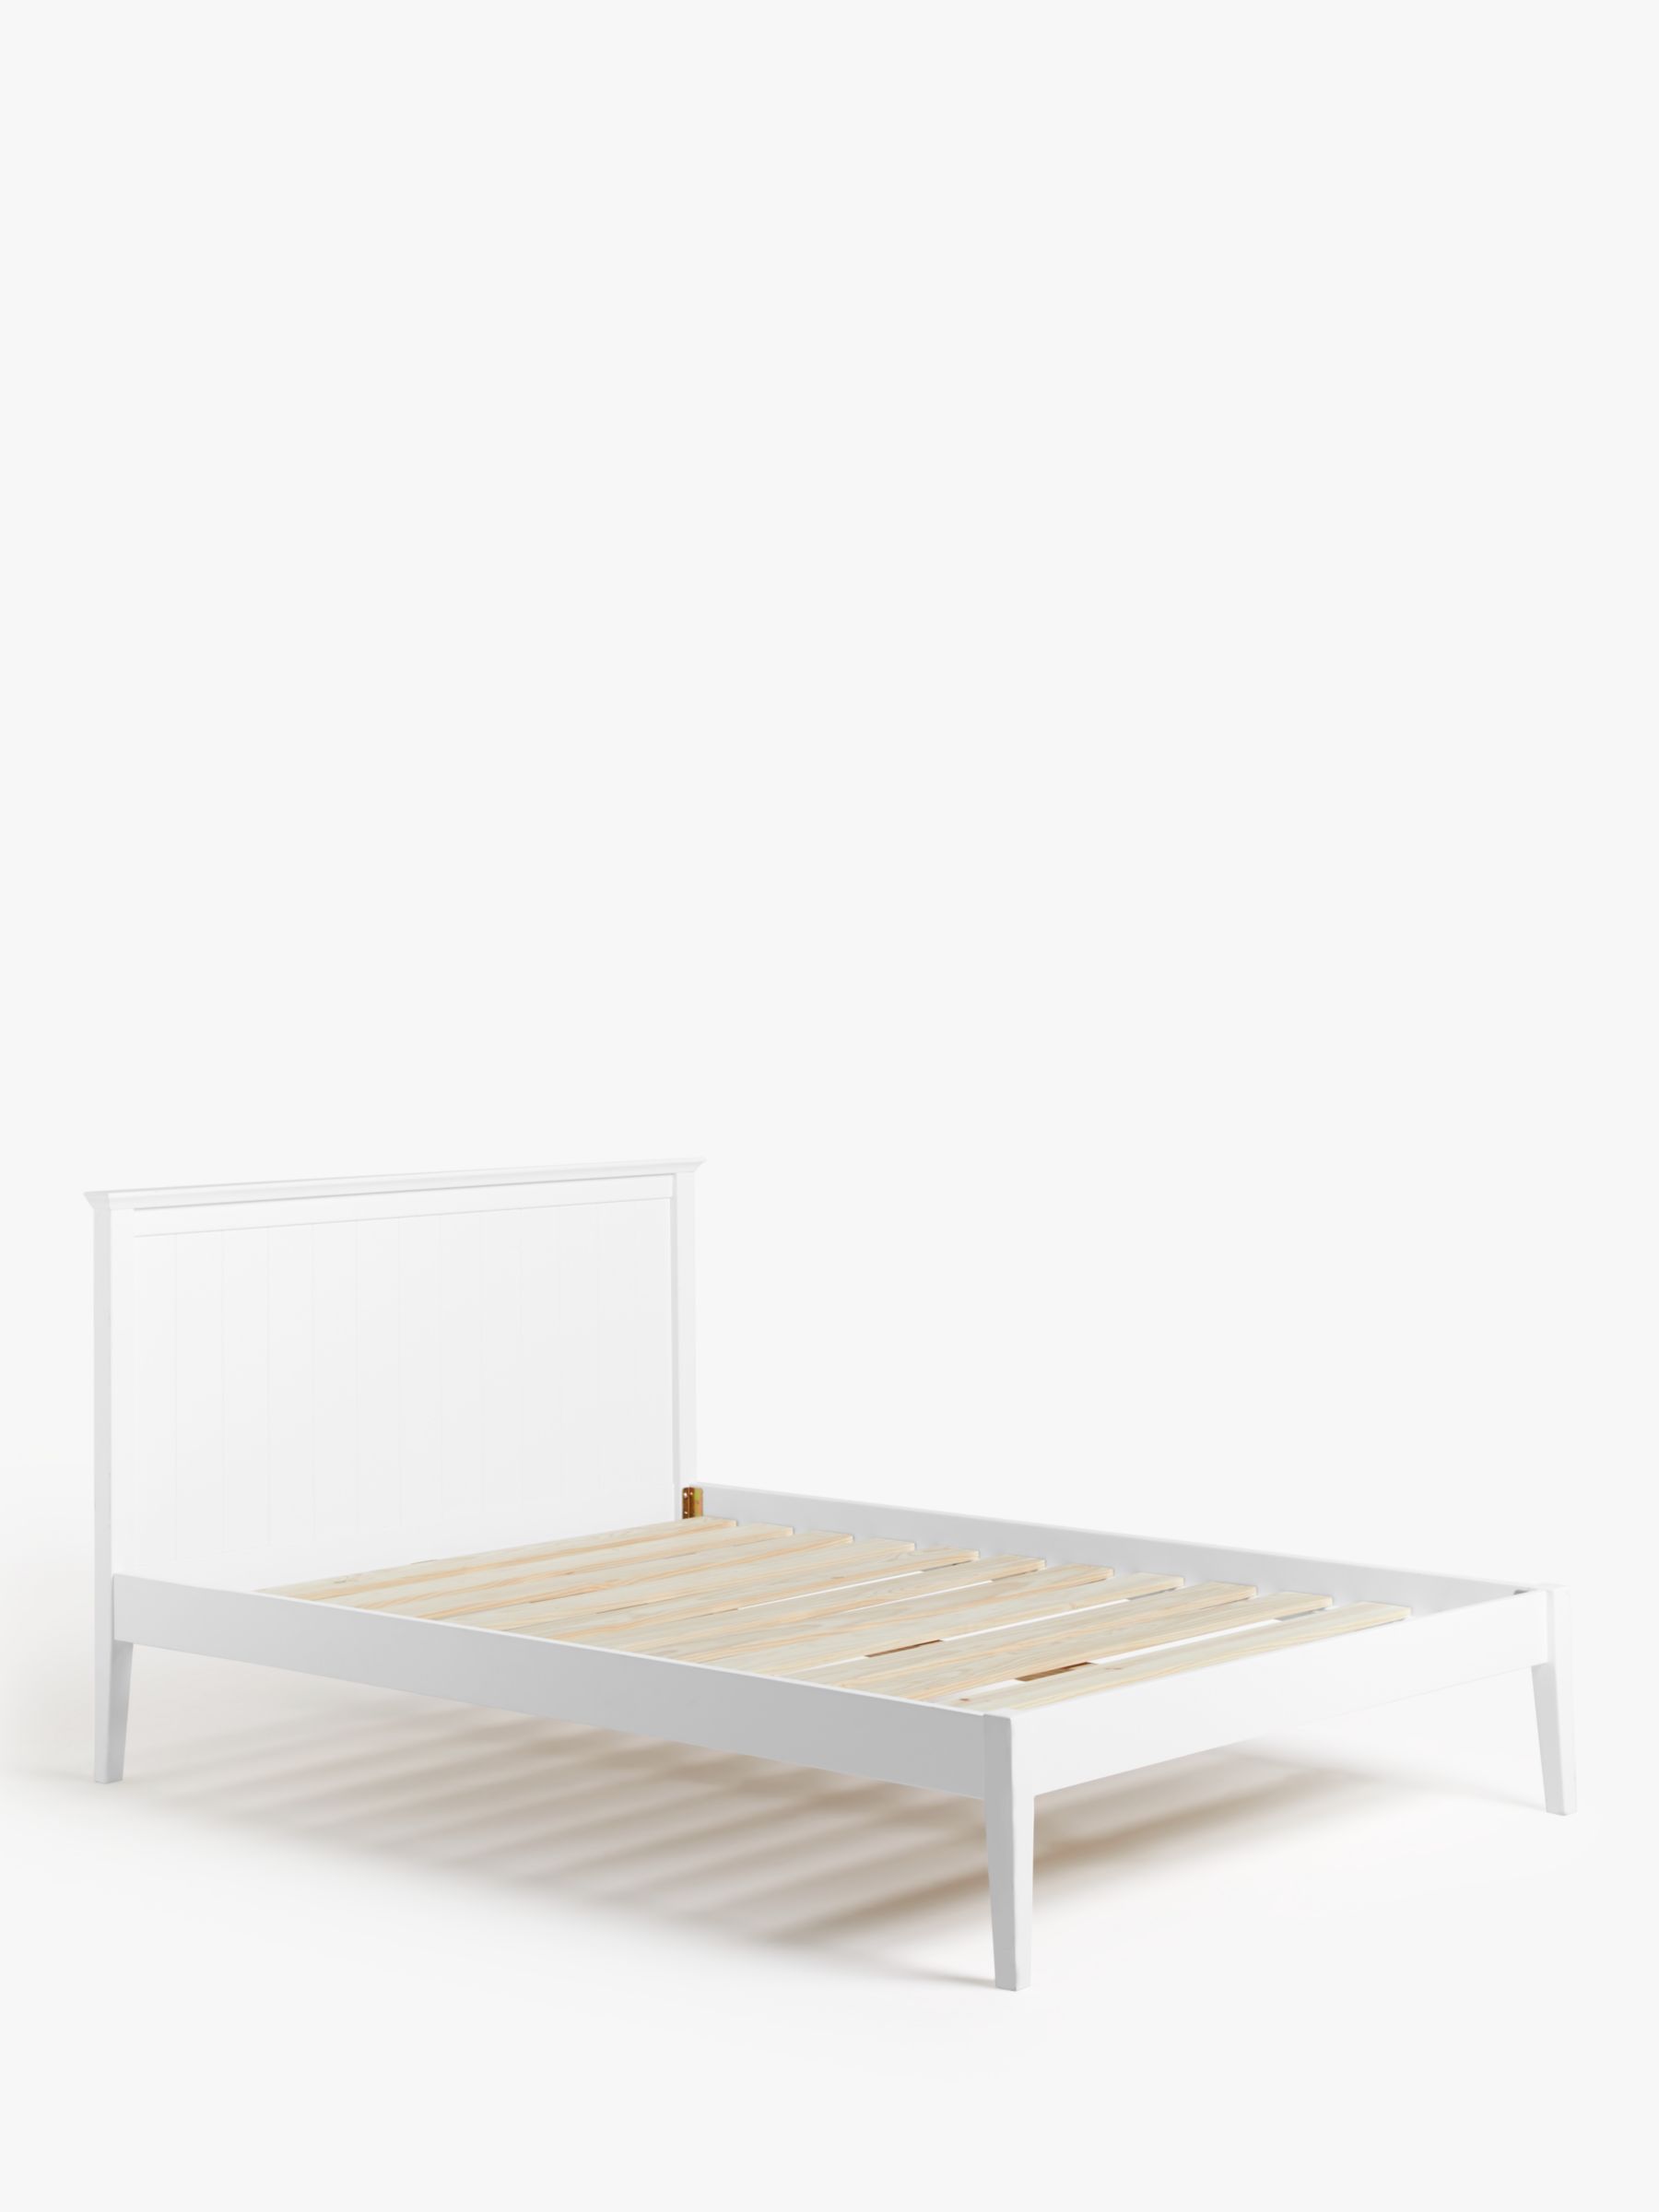 Photo of John lewis anyday albany bed frame double